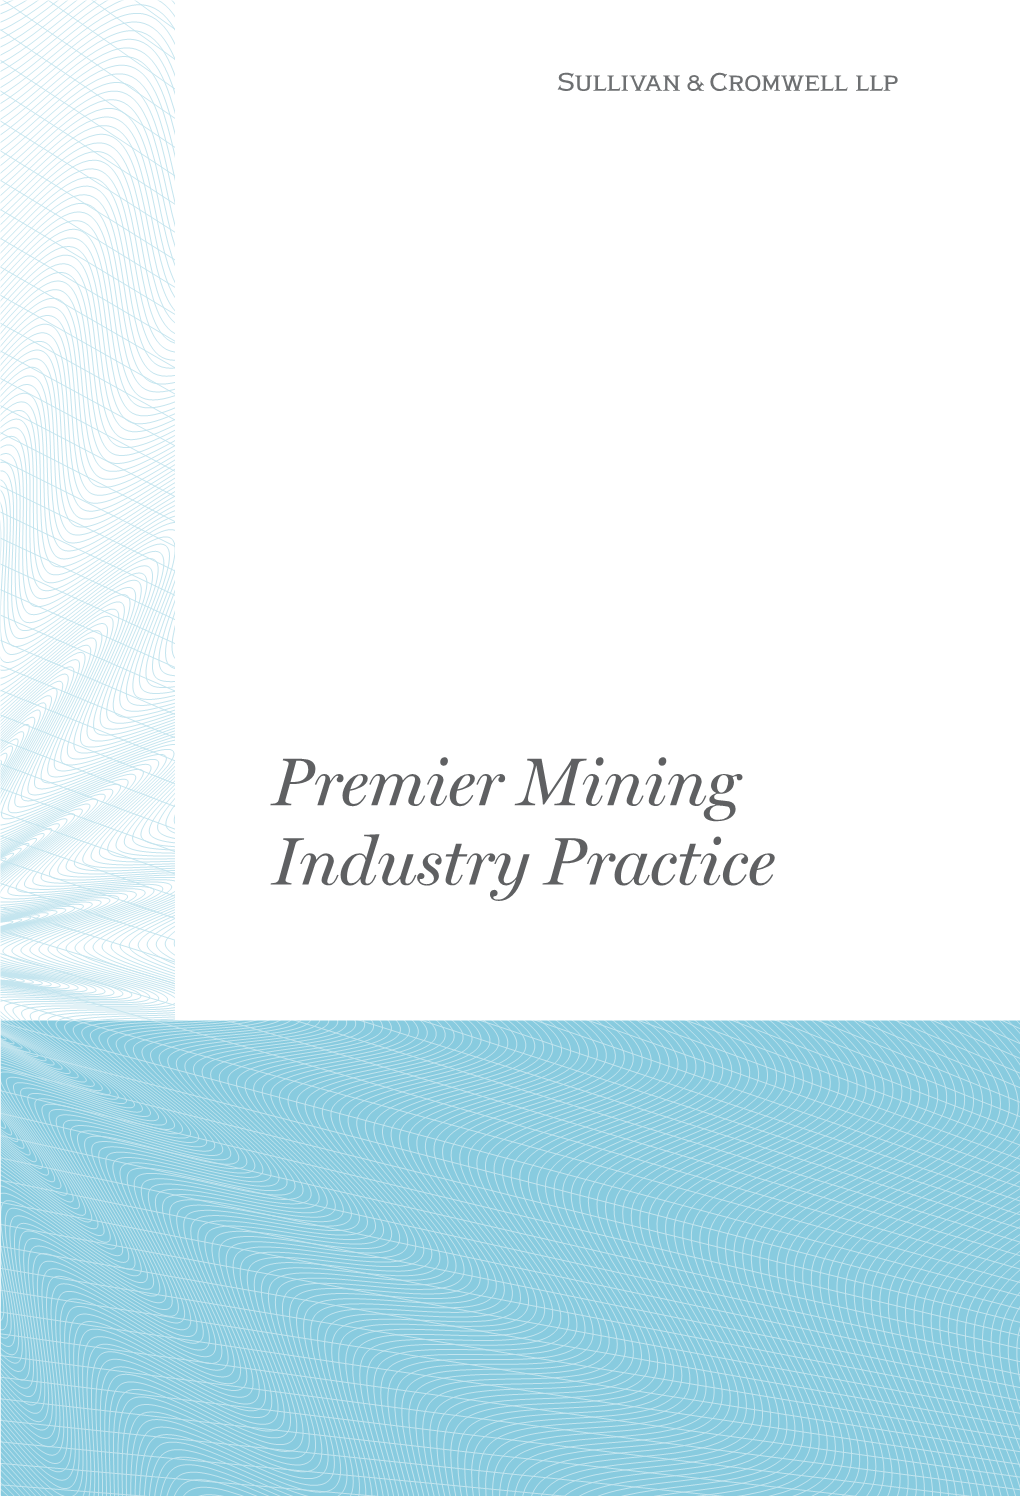 Premier Mining Industry Practice “They Go to Great Lengths to Understand Your Industry, Business and Specific Objectives